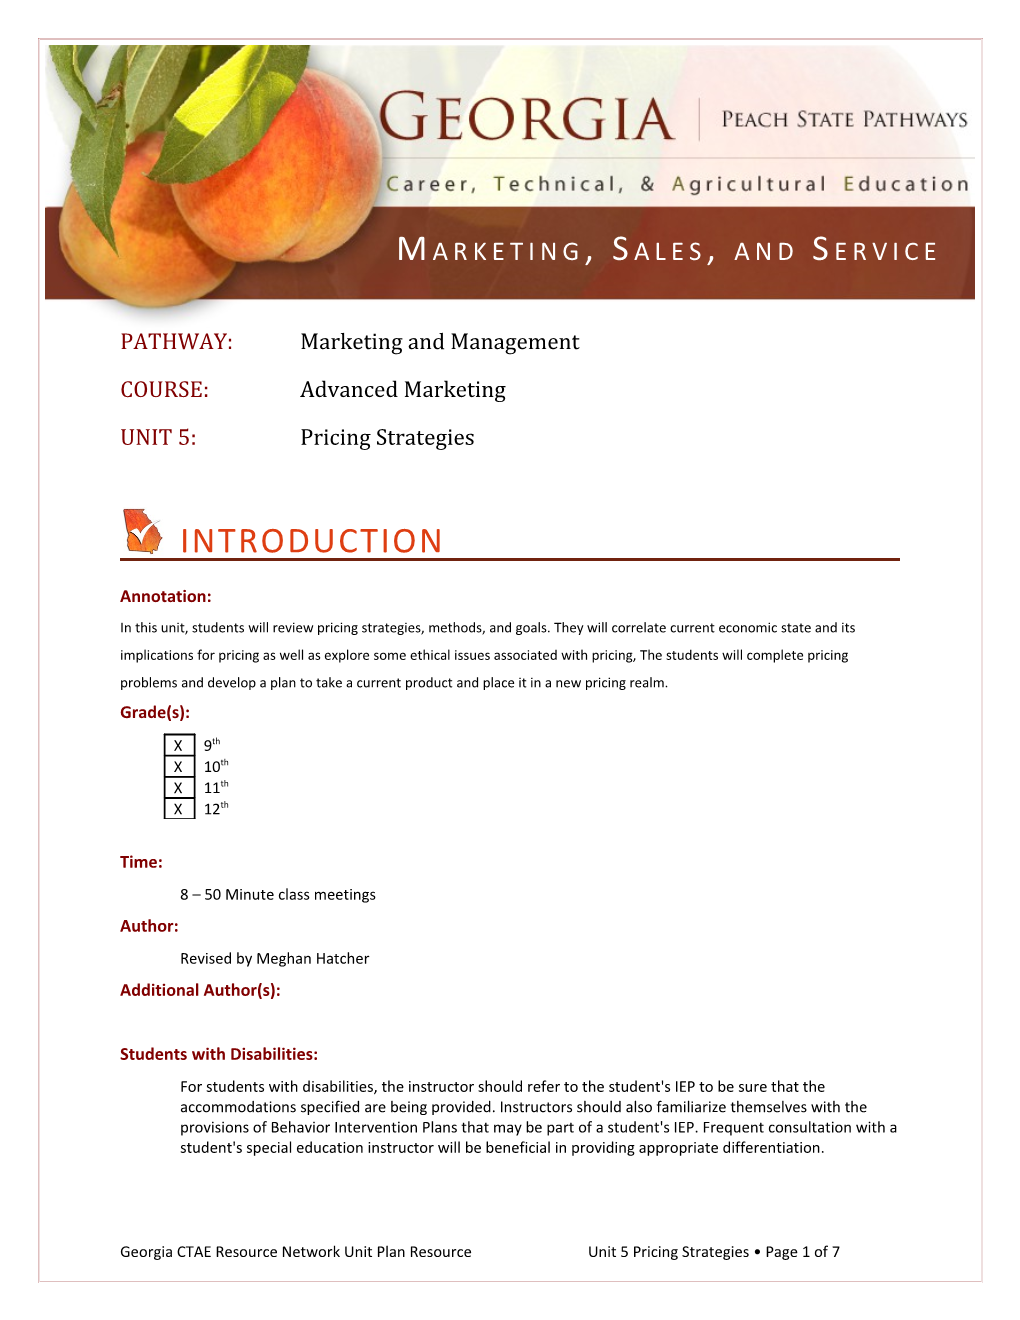 PATHWAY: Marketing and Management